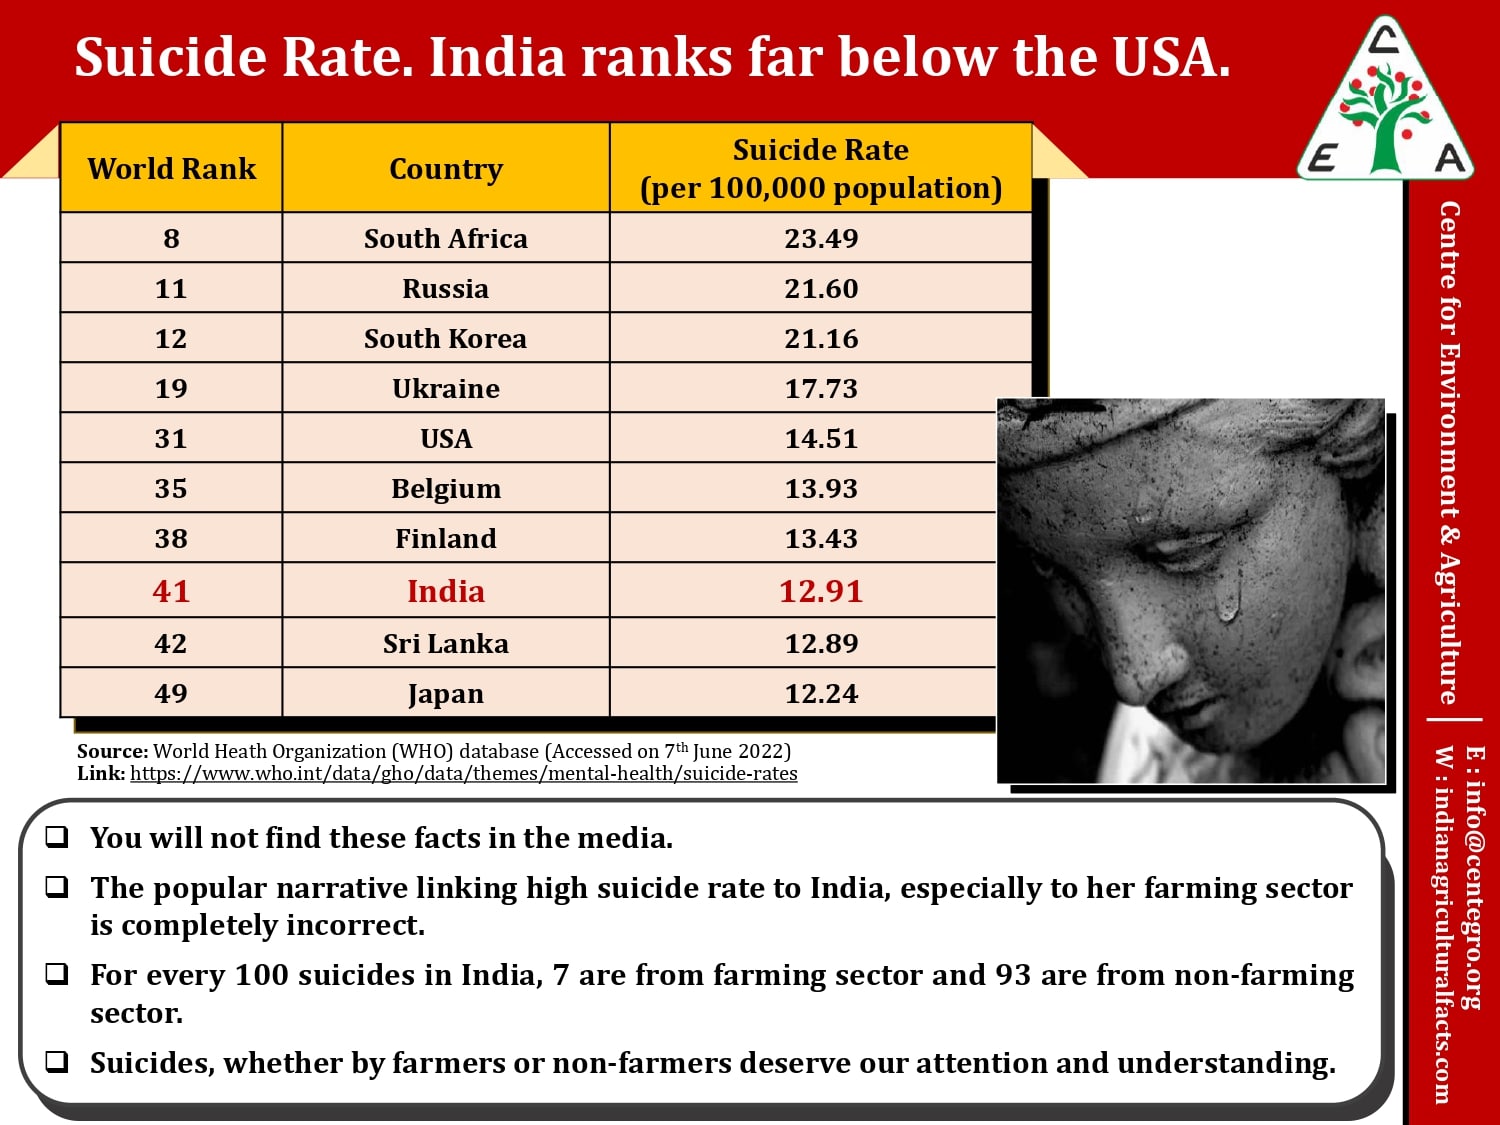 Suicide Rate. India ranks far below than USA